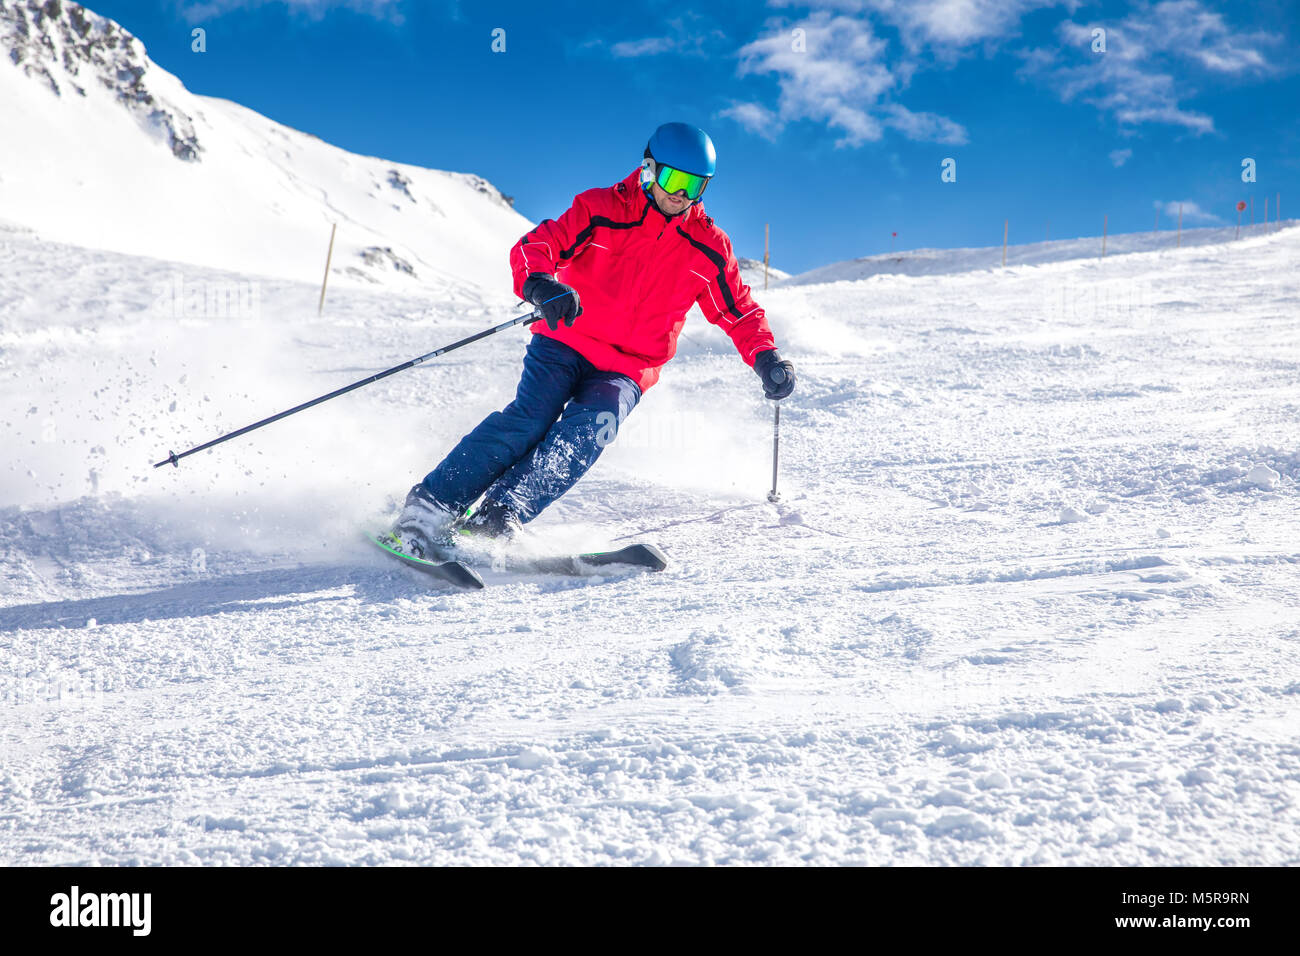 Man skiing on the prepared slope with fresh new powder snow in Tyrolian Alps, Zillertal, Austria Stock Photo